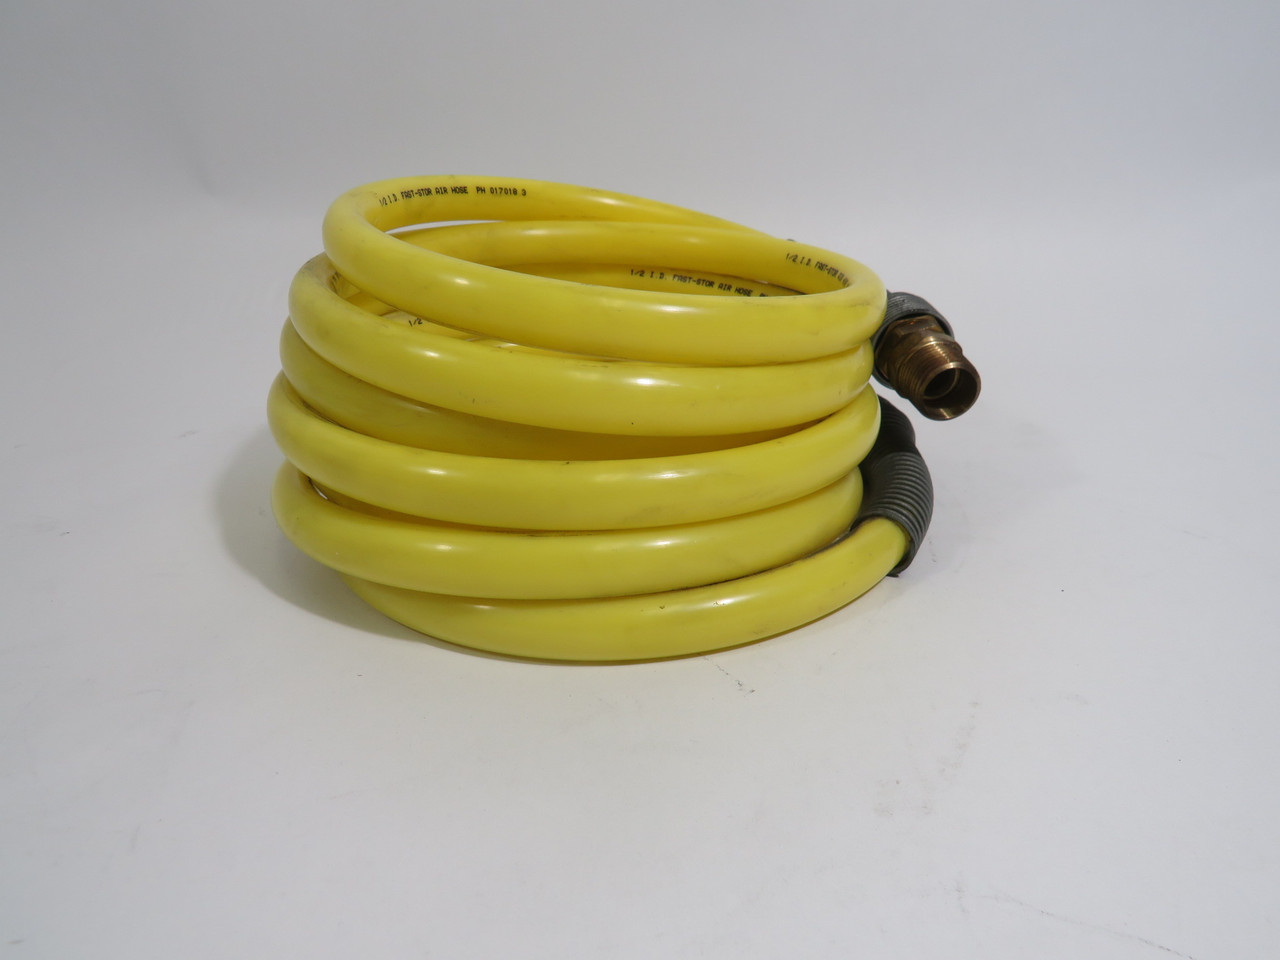 Parker A0812-MC8-ML8 Fast-Stor Air Hose Coiled Yellow 1/2" ID 5" Height USED